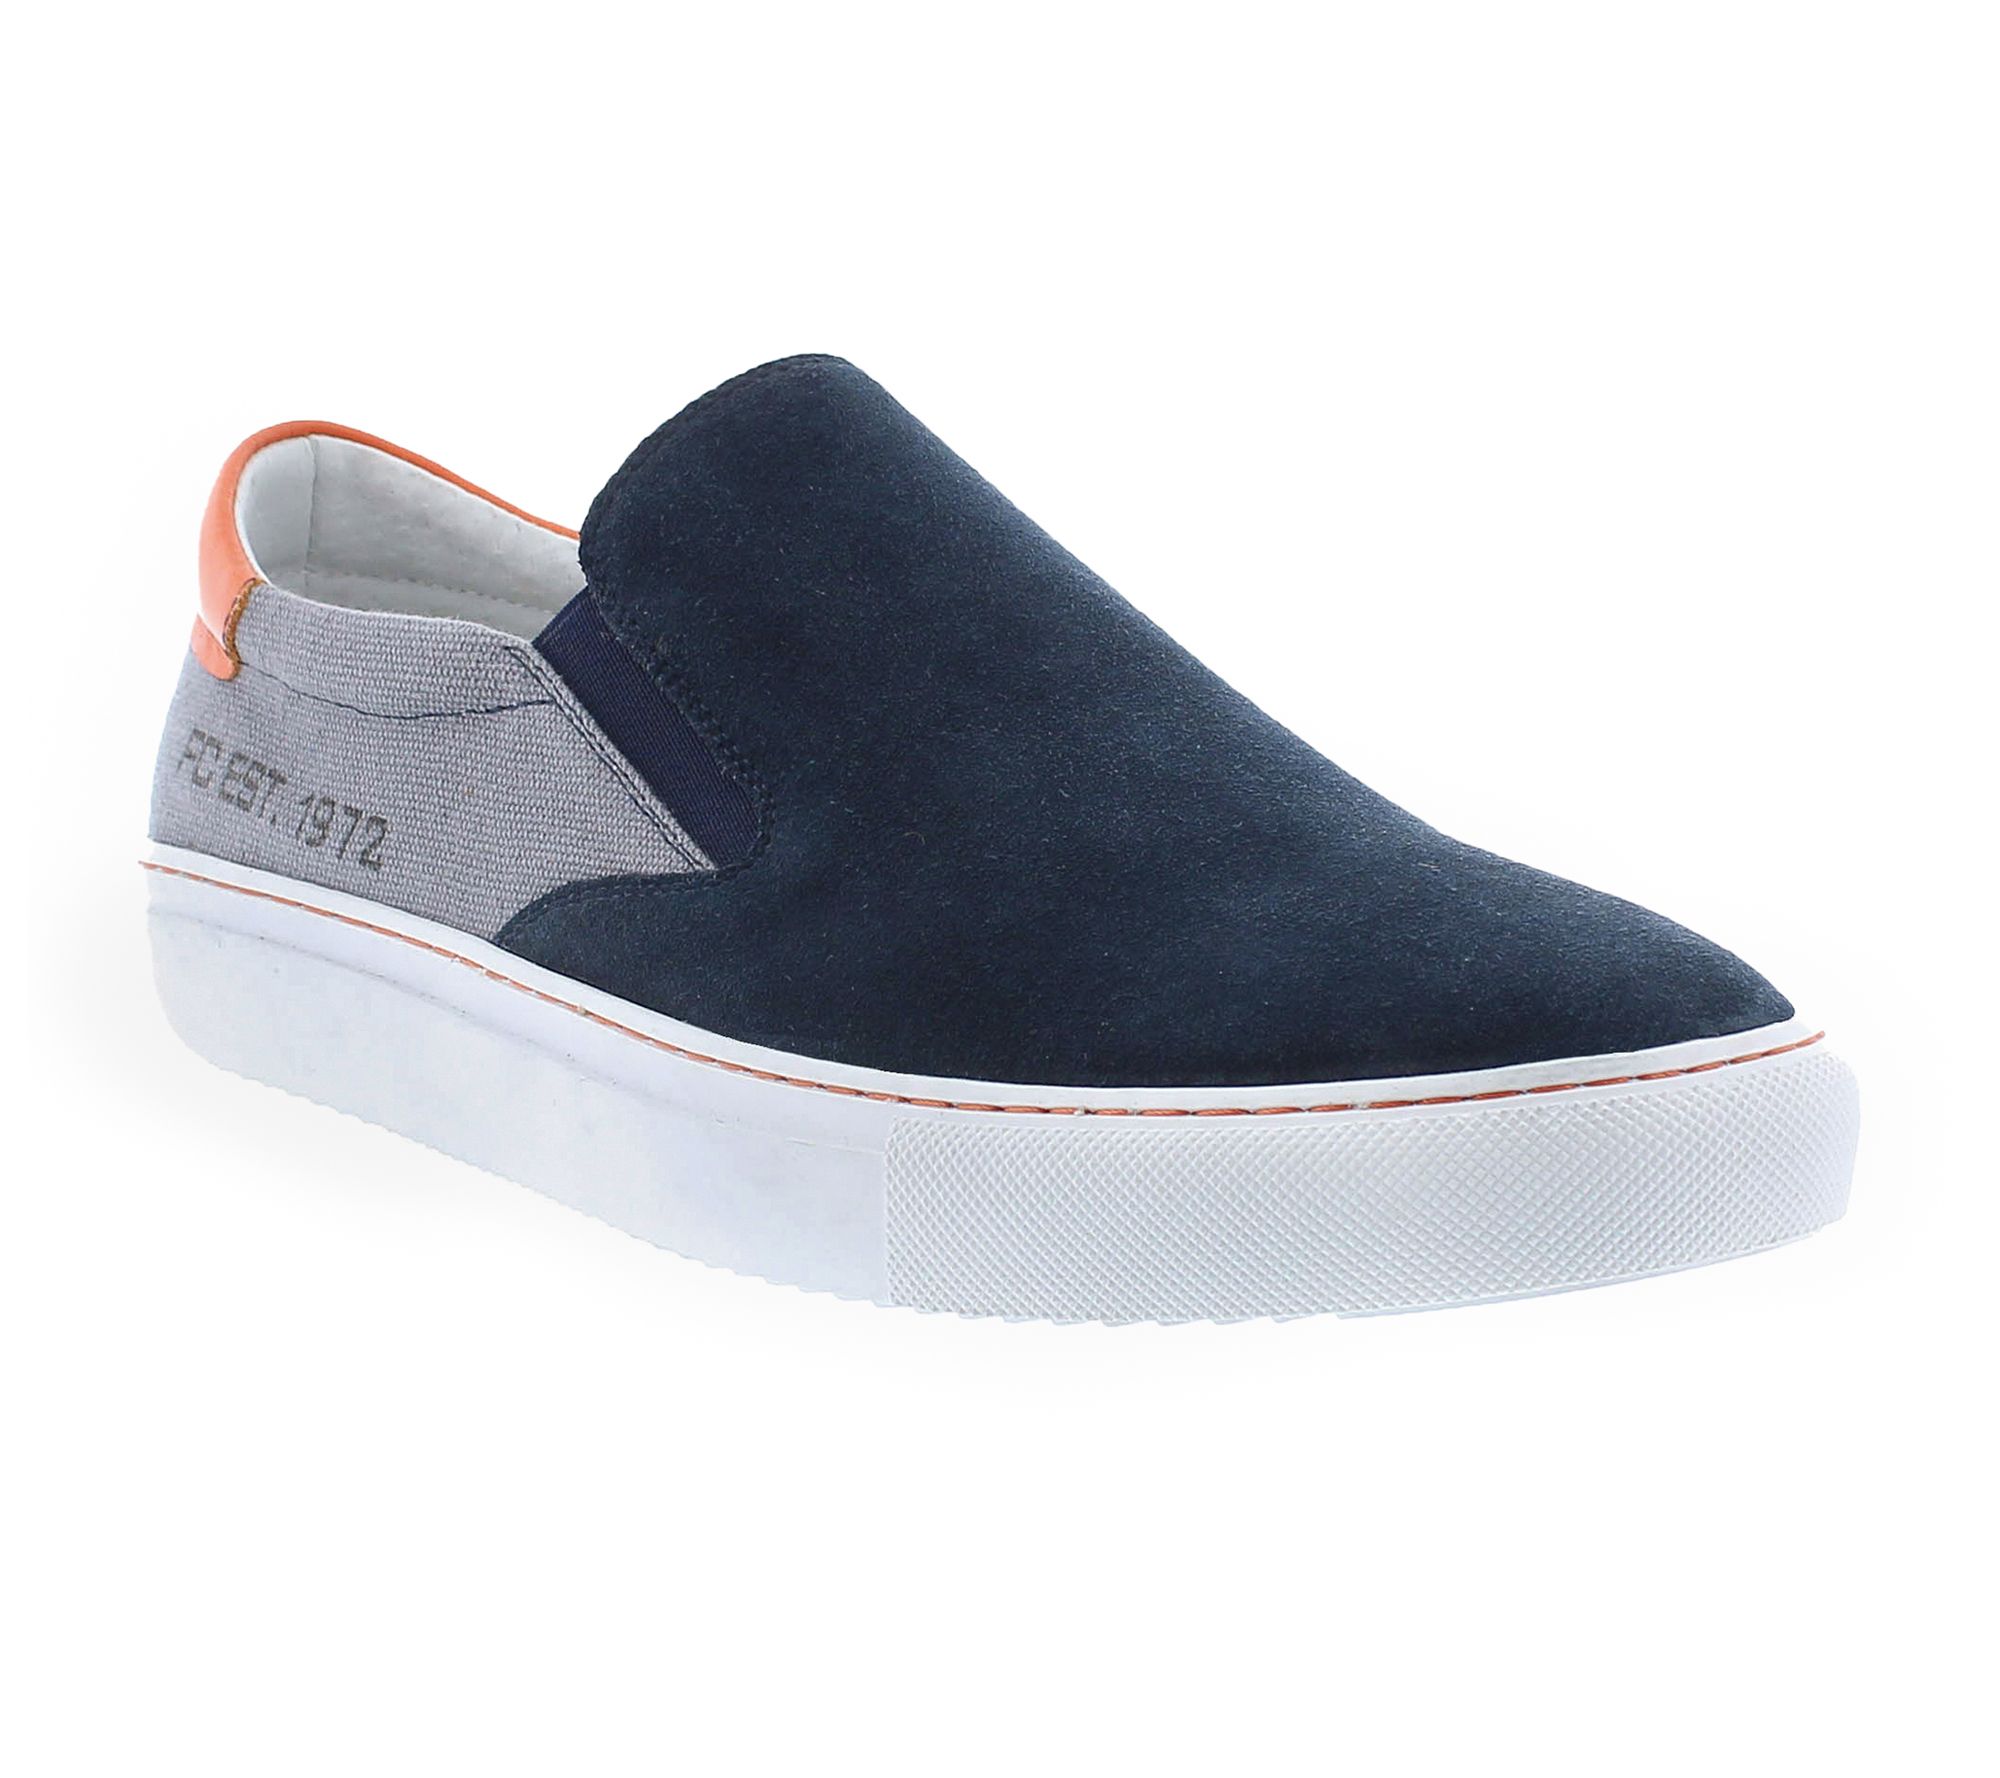 Ryd op Polering Fern French Connection Men's Slip-on Sneaker - Alexis - QVC.com